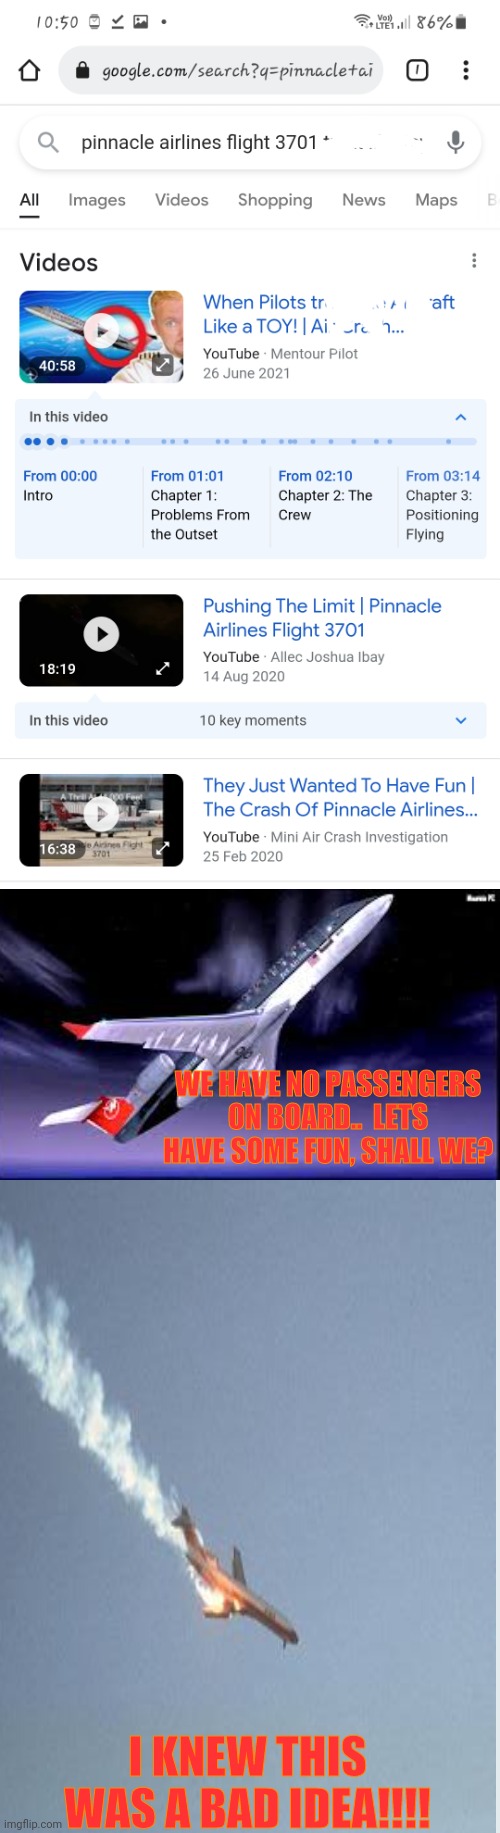 Pinnacle Airlines 3701 (Northwest) | WE HAVE NO PASSENGERS ON BOARD..  LETS HAVE SOME FUN, SHALL WE? I KNEW THIS WAS A BAD IDEA!!!! | image tagged in oof,why | made w/ Imgflip meme maker